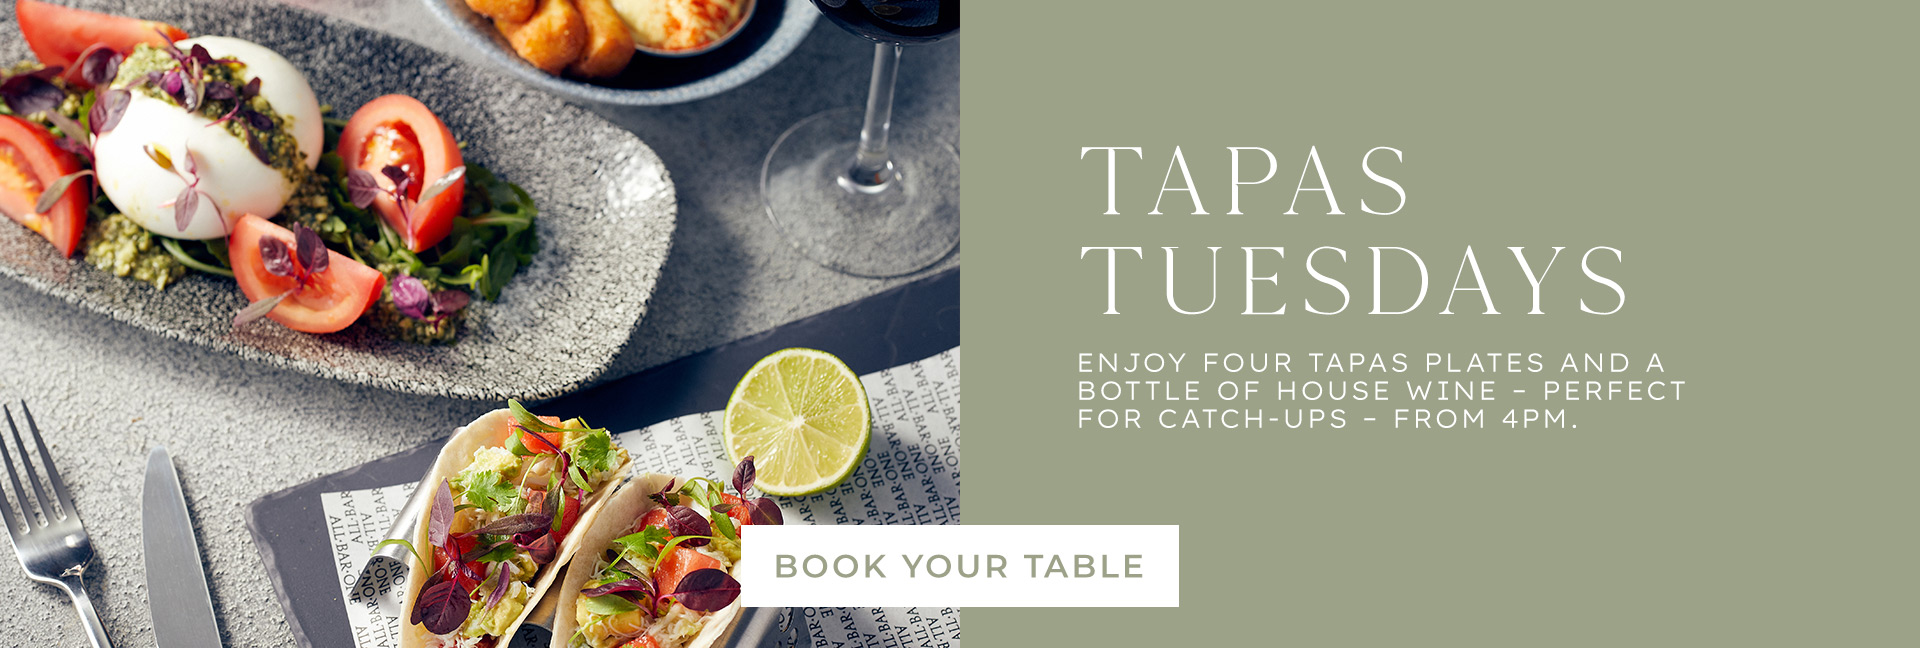 Tapas Tuesday at All Bar One Moorgate - Book now